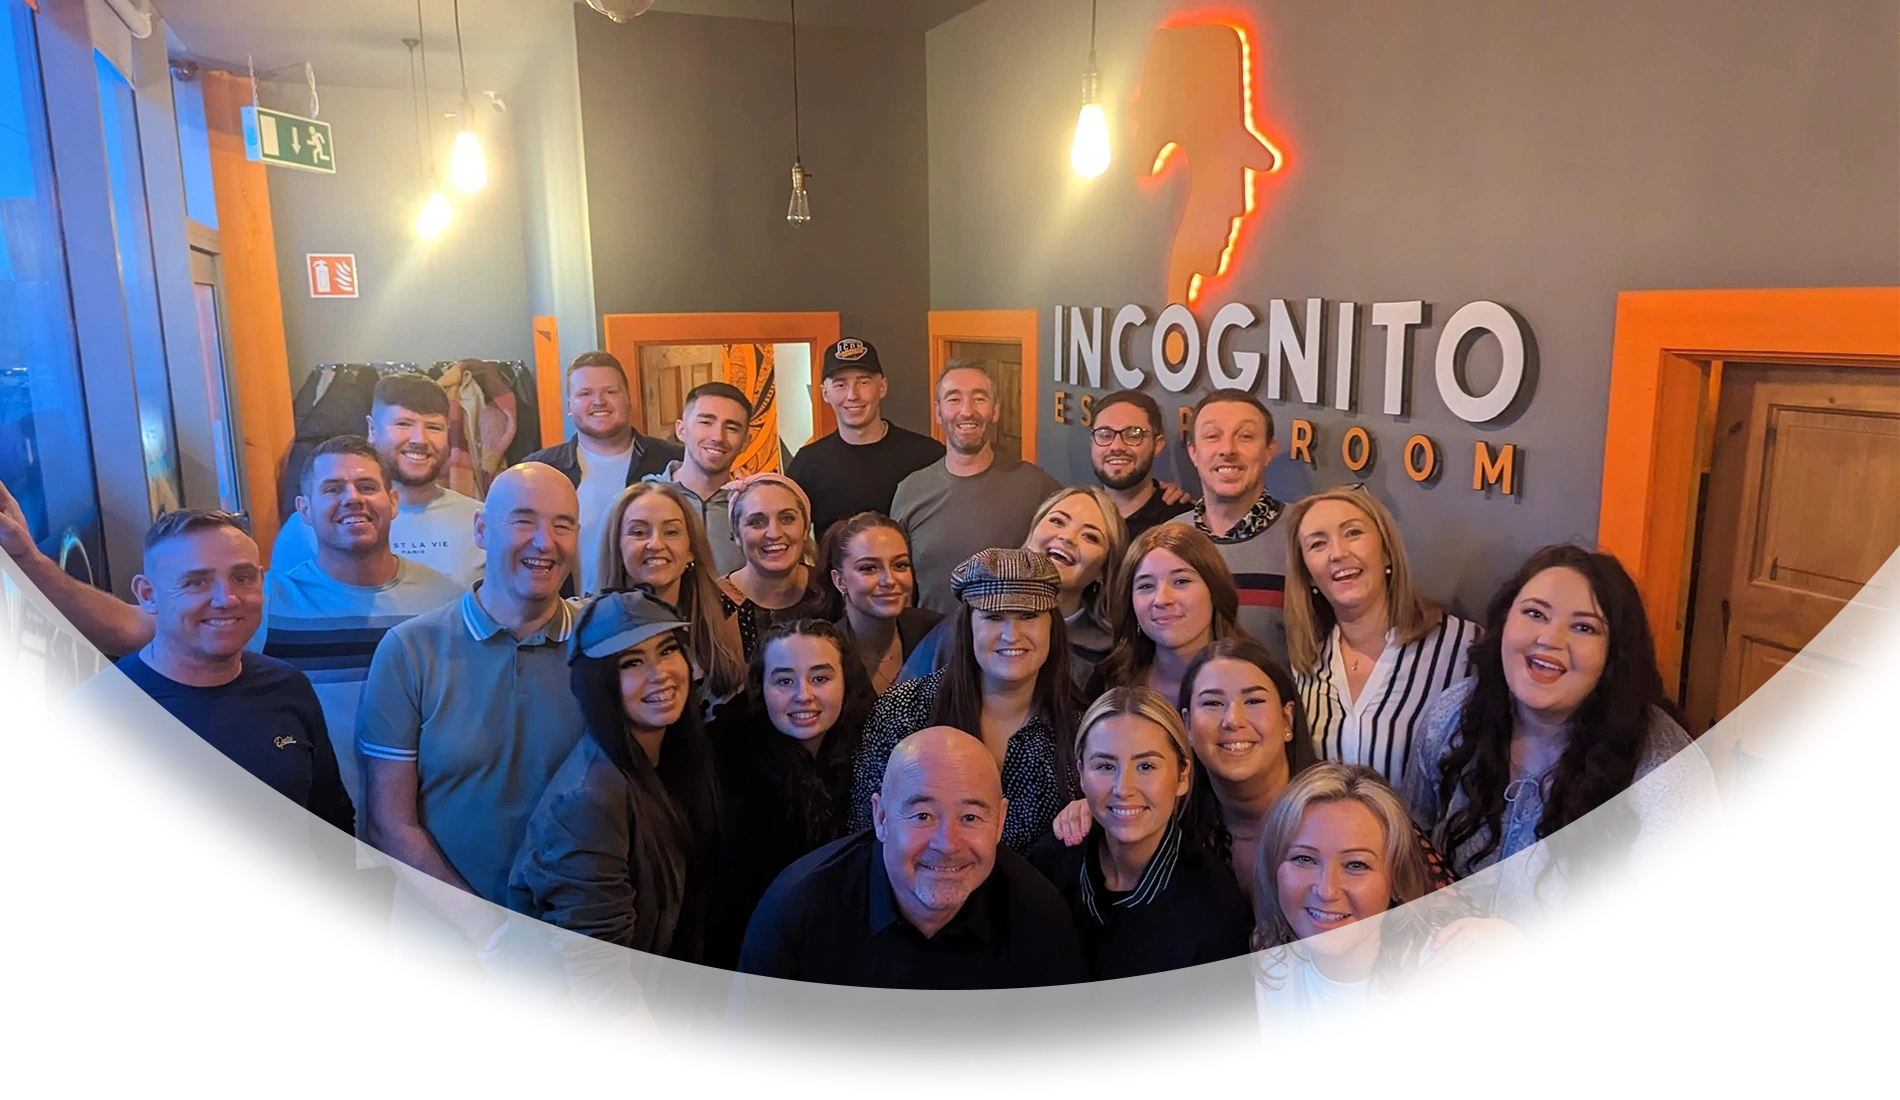 A group of people are in a happy mood after team building activities by Incognito escape rooms Dublin, Ireland.